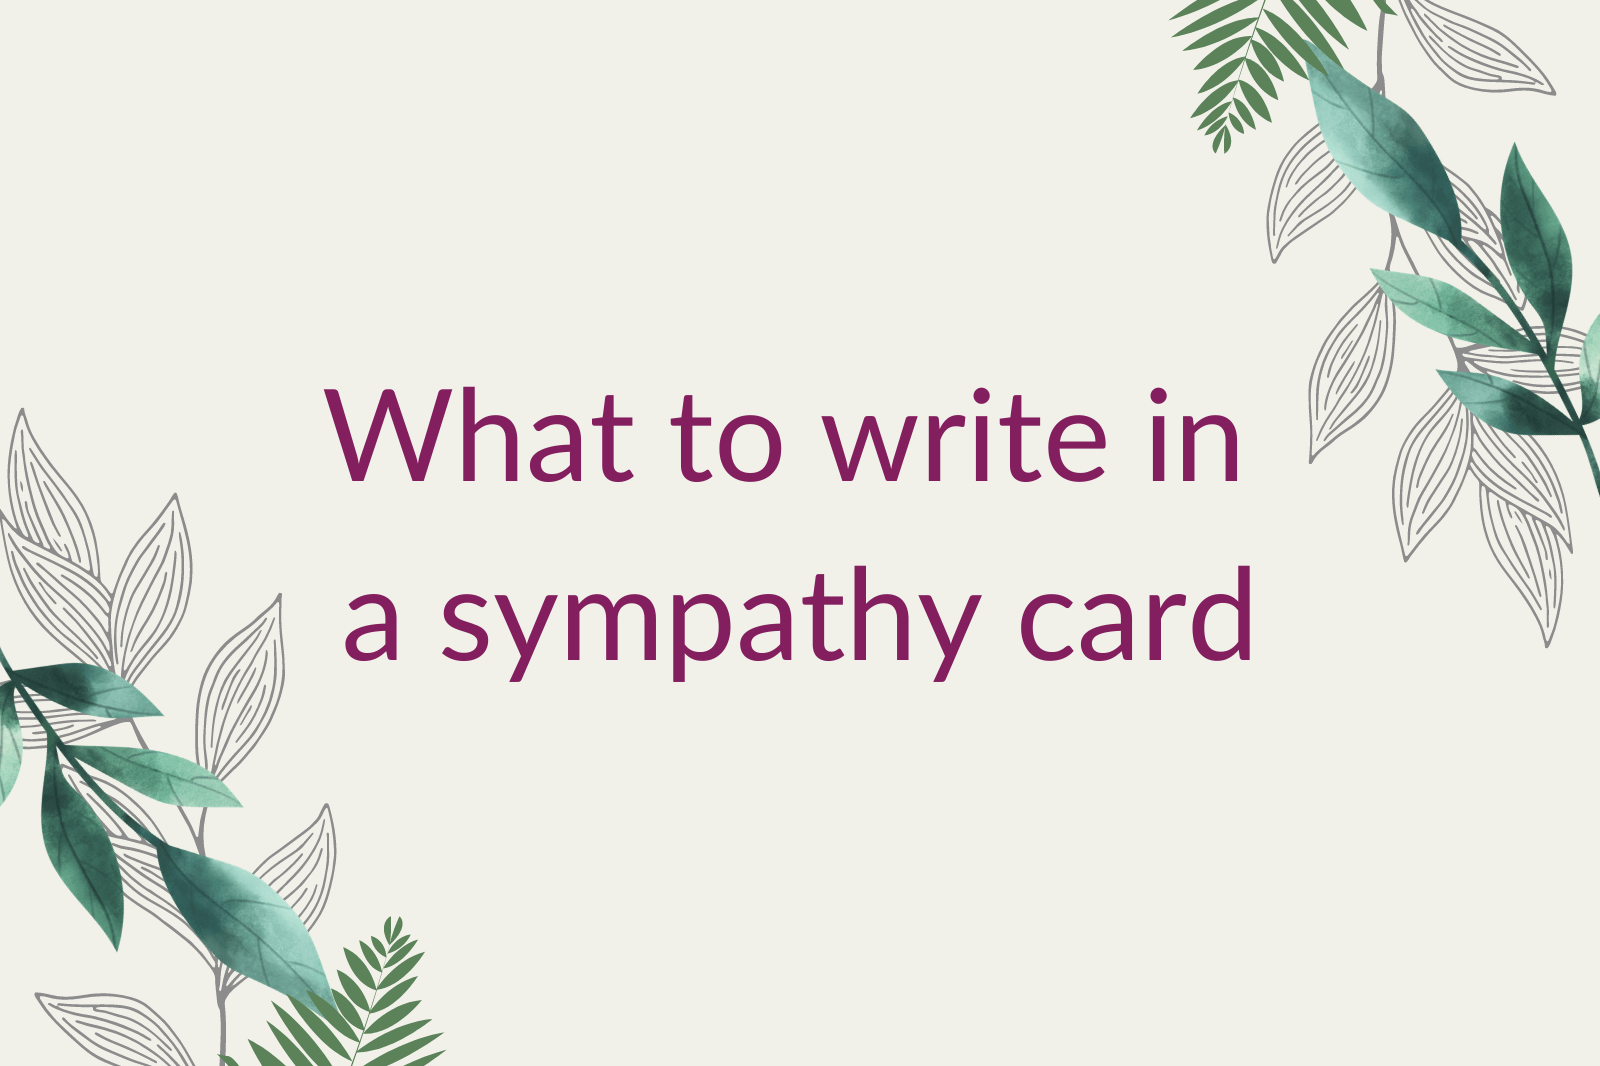 What to write in a sympathy card: a definitive guide